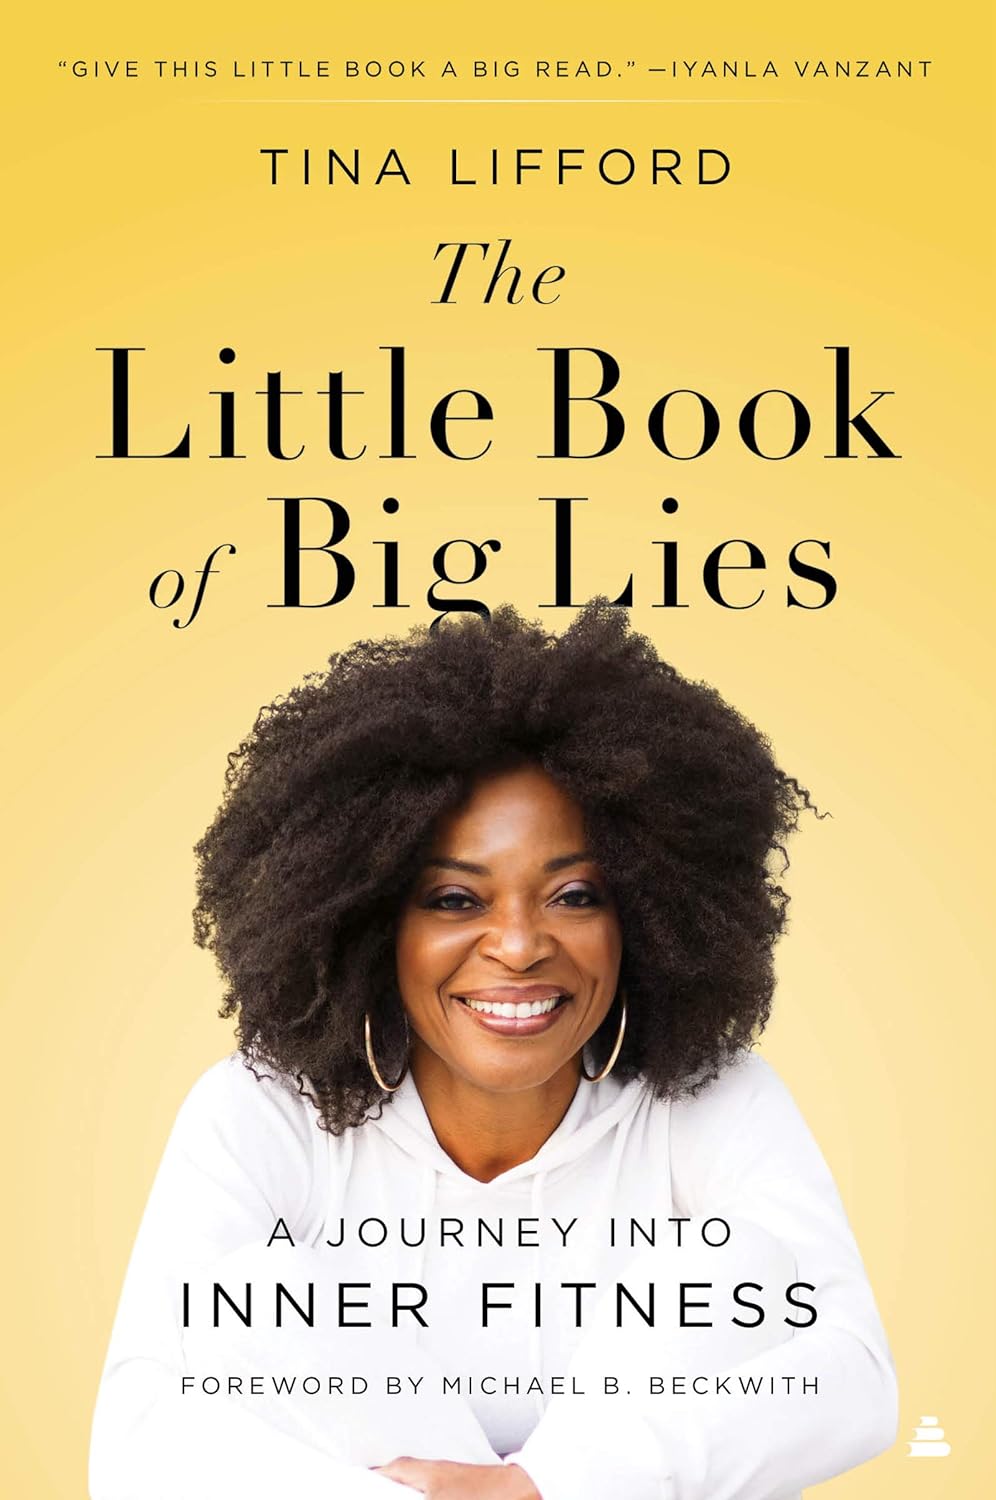 'The Little Book of Big Lies' by Tina Lifford